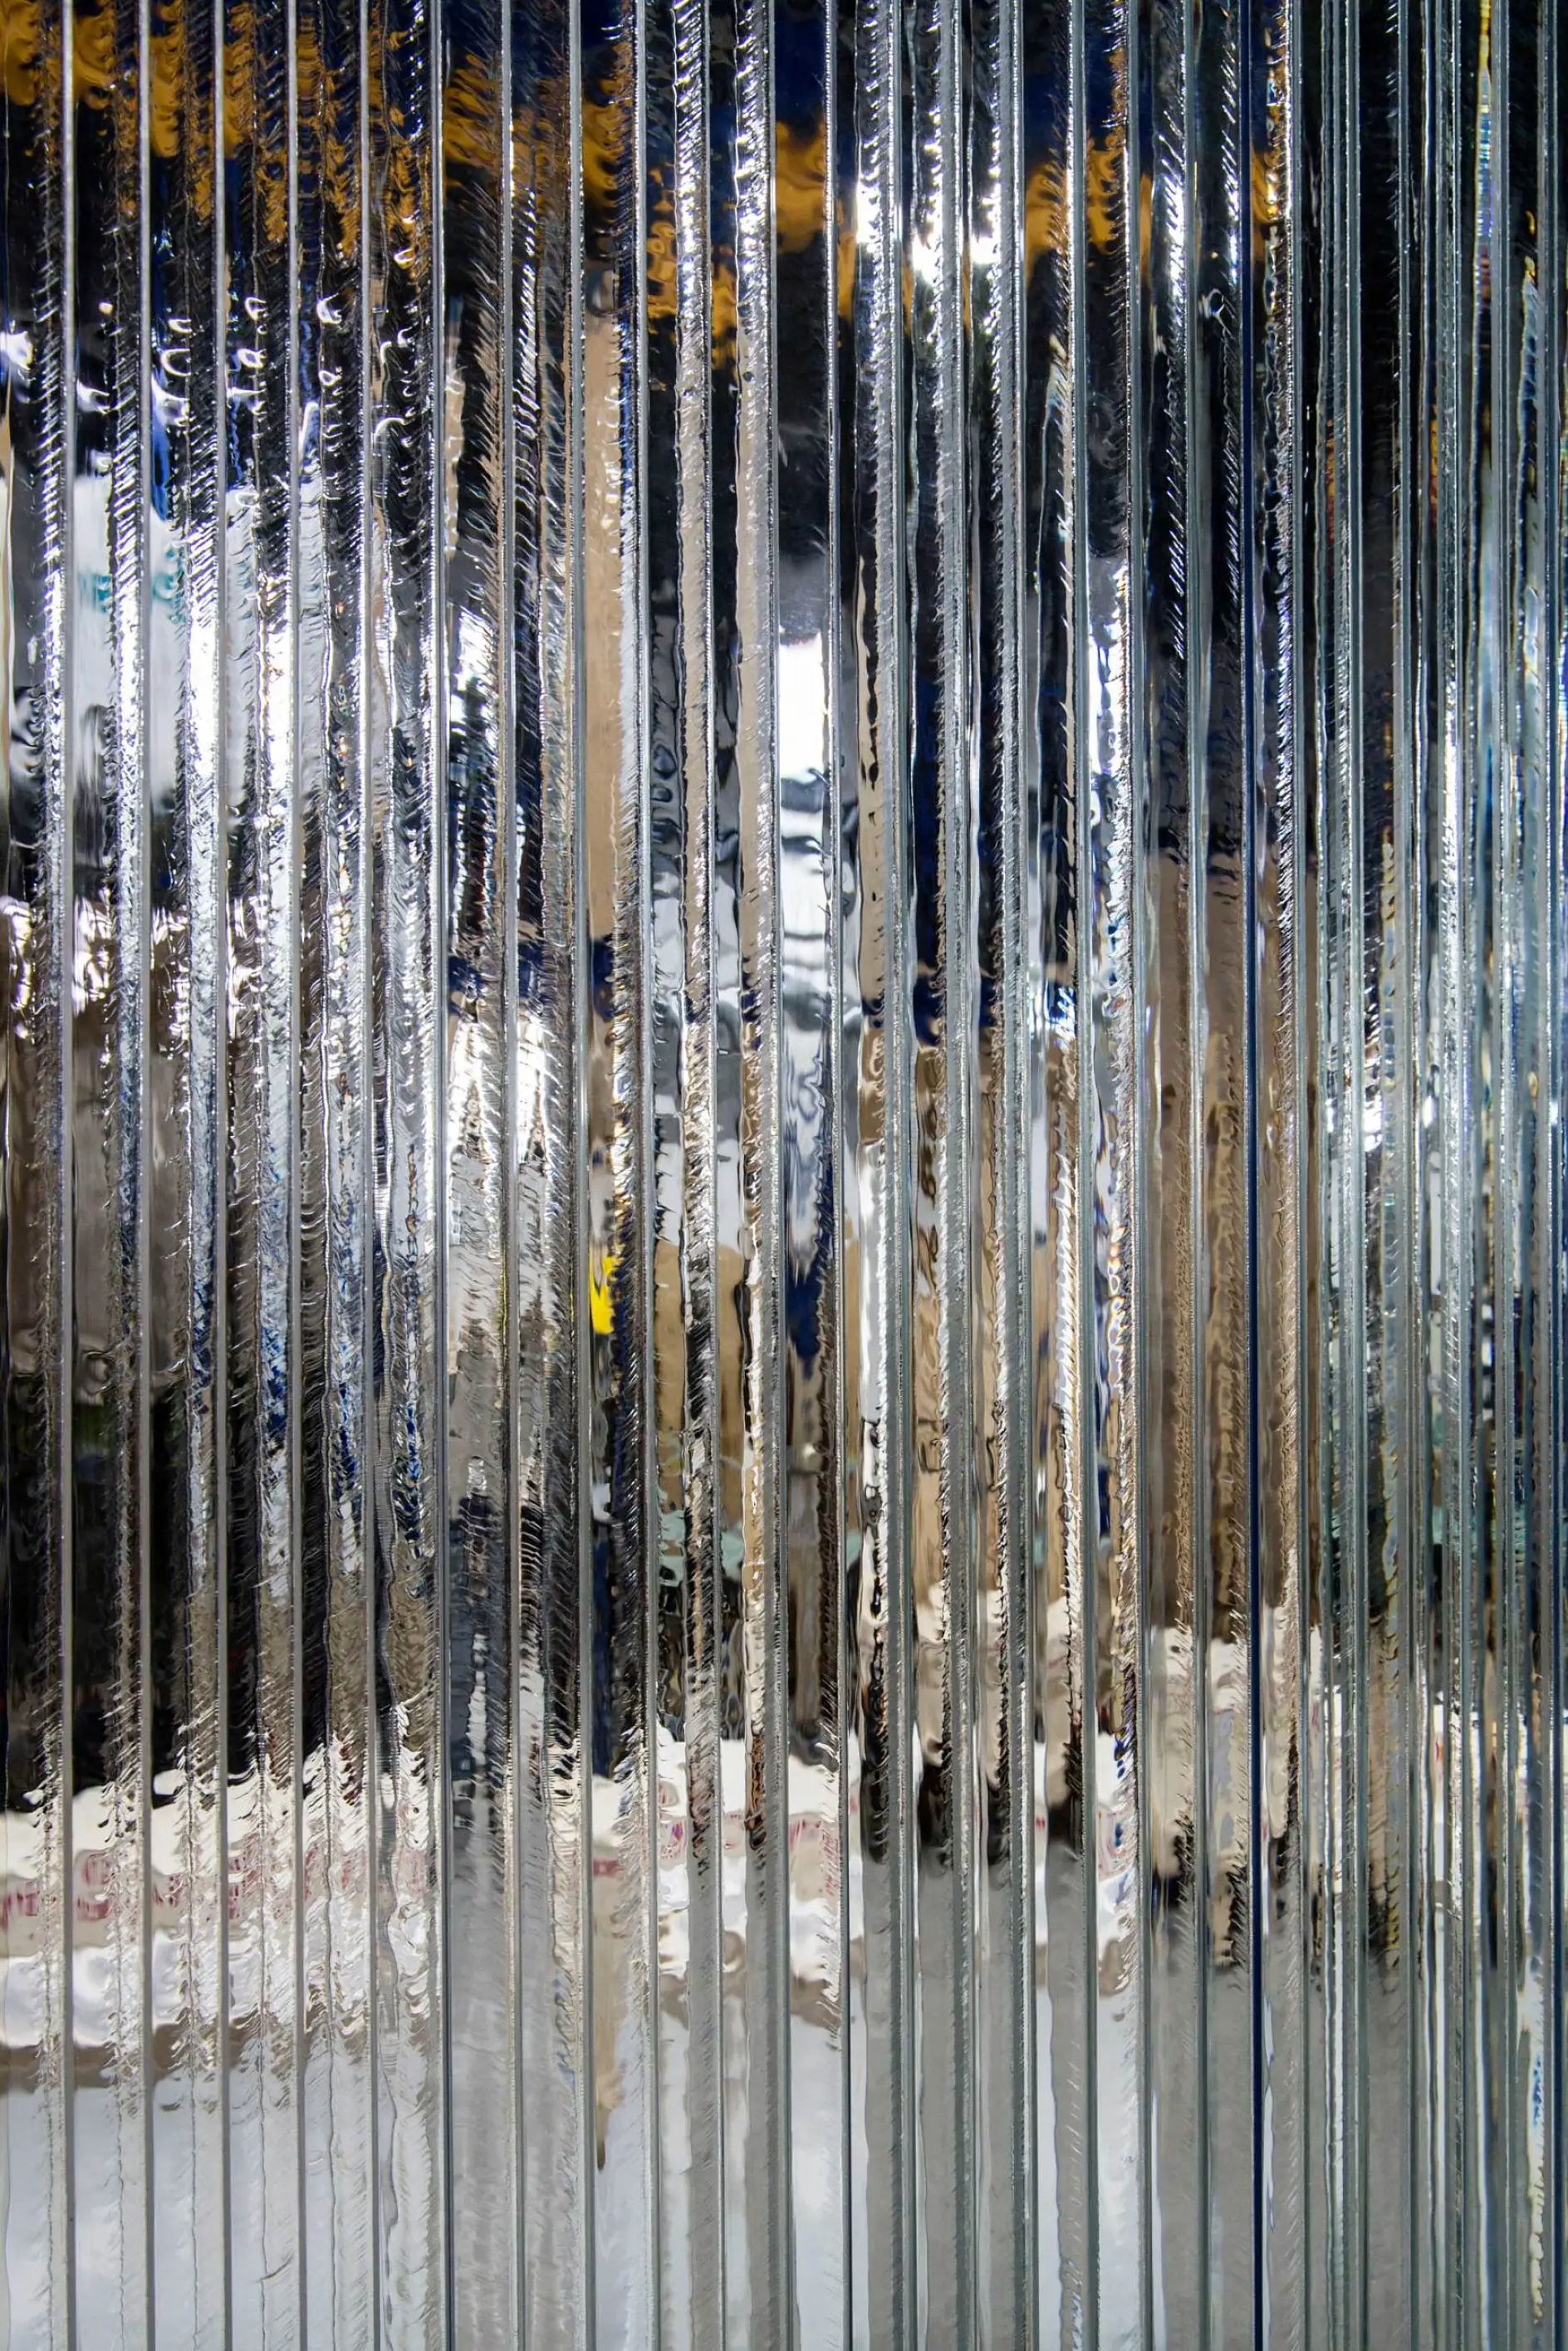 More than 10,000 glass elements were joined together to create a semi-transparent, curved facade.